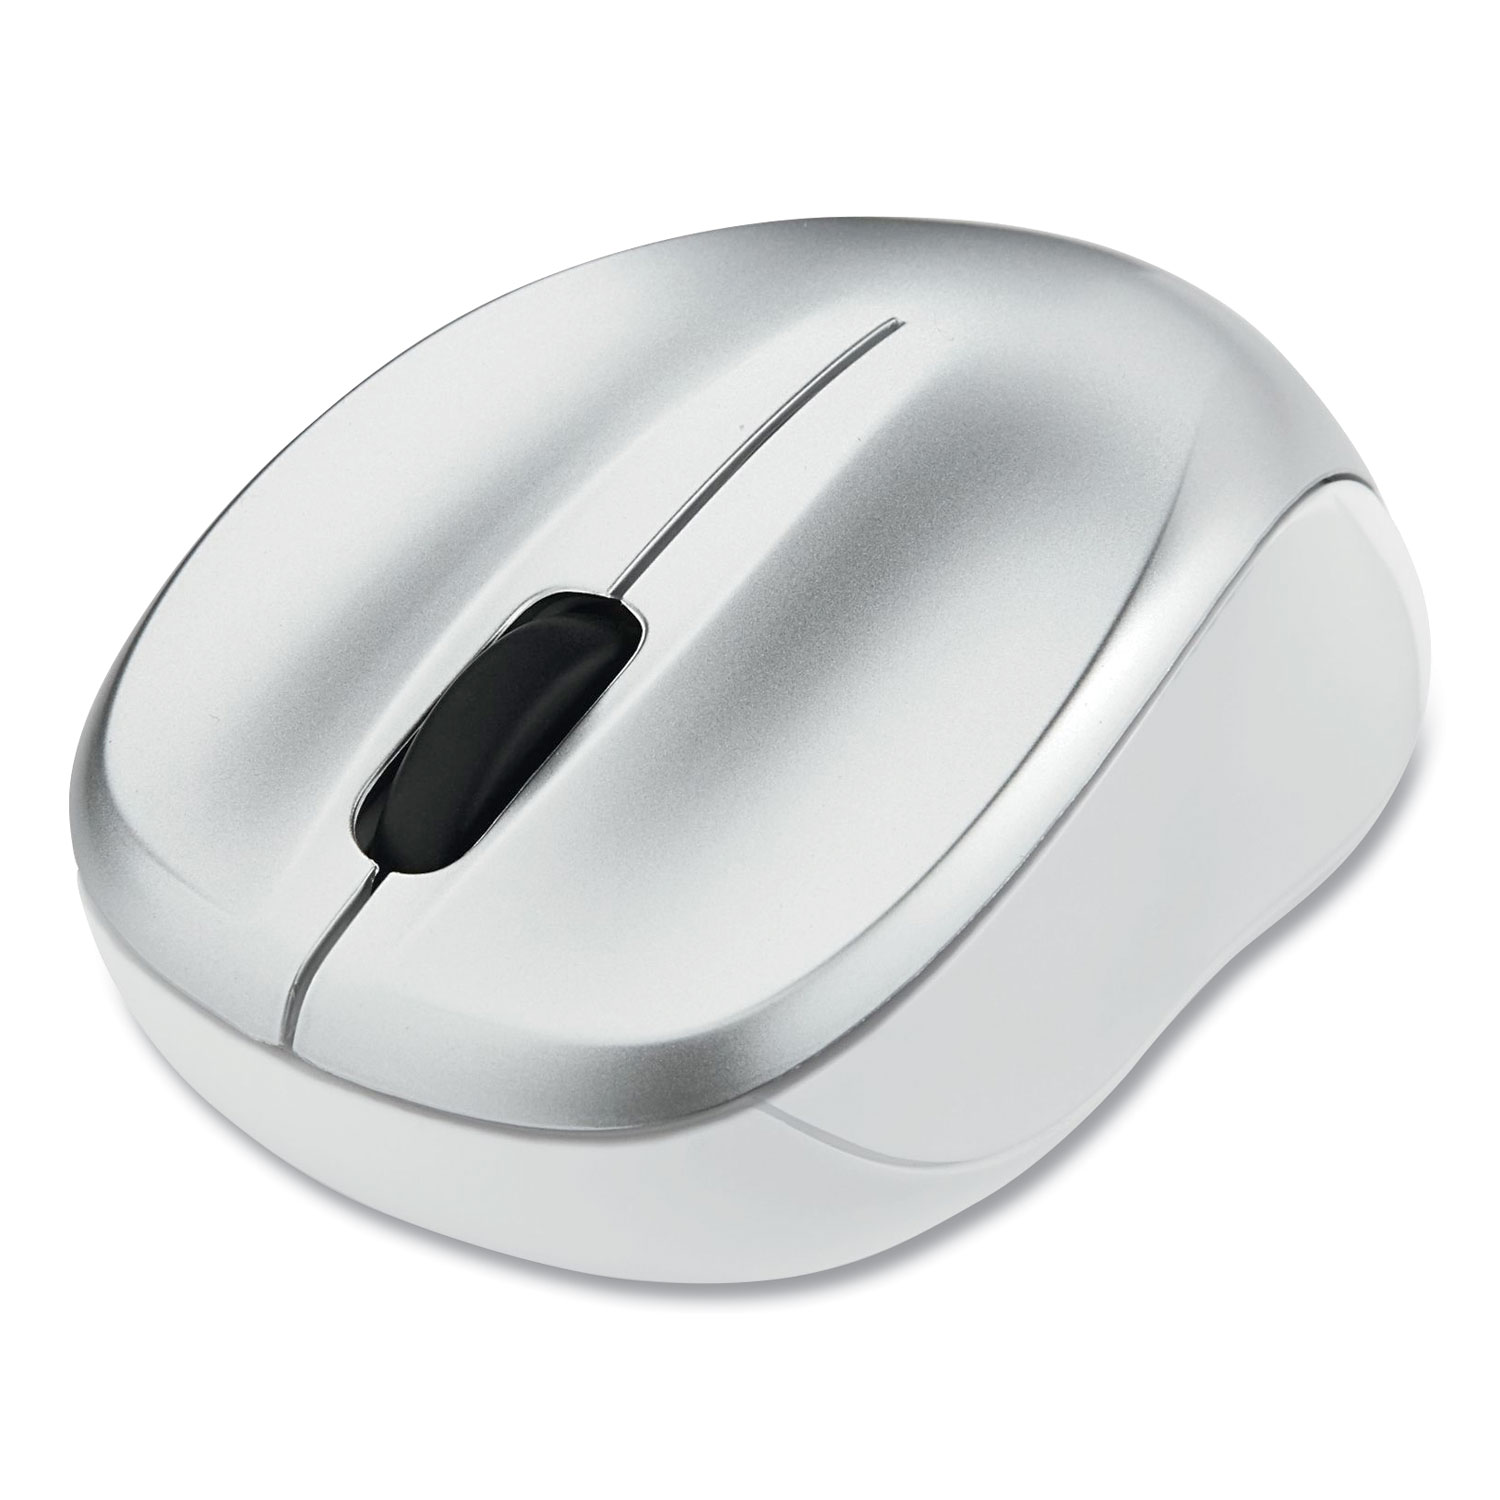  Verbatim 99777 Silent Wireless Blue LED Mouse, 2.4 GHz Frequency/32.8 ft Wireless Range, Left/Right Hand Use, Silver (VER99777) 